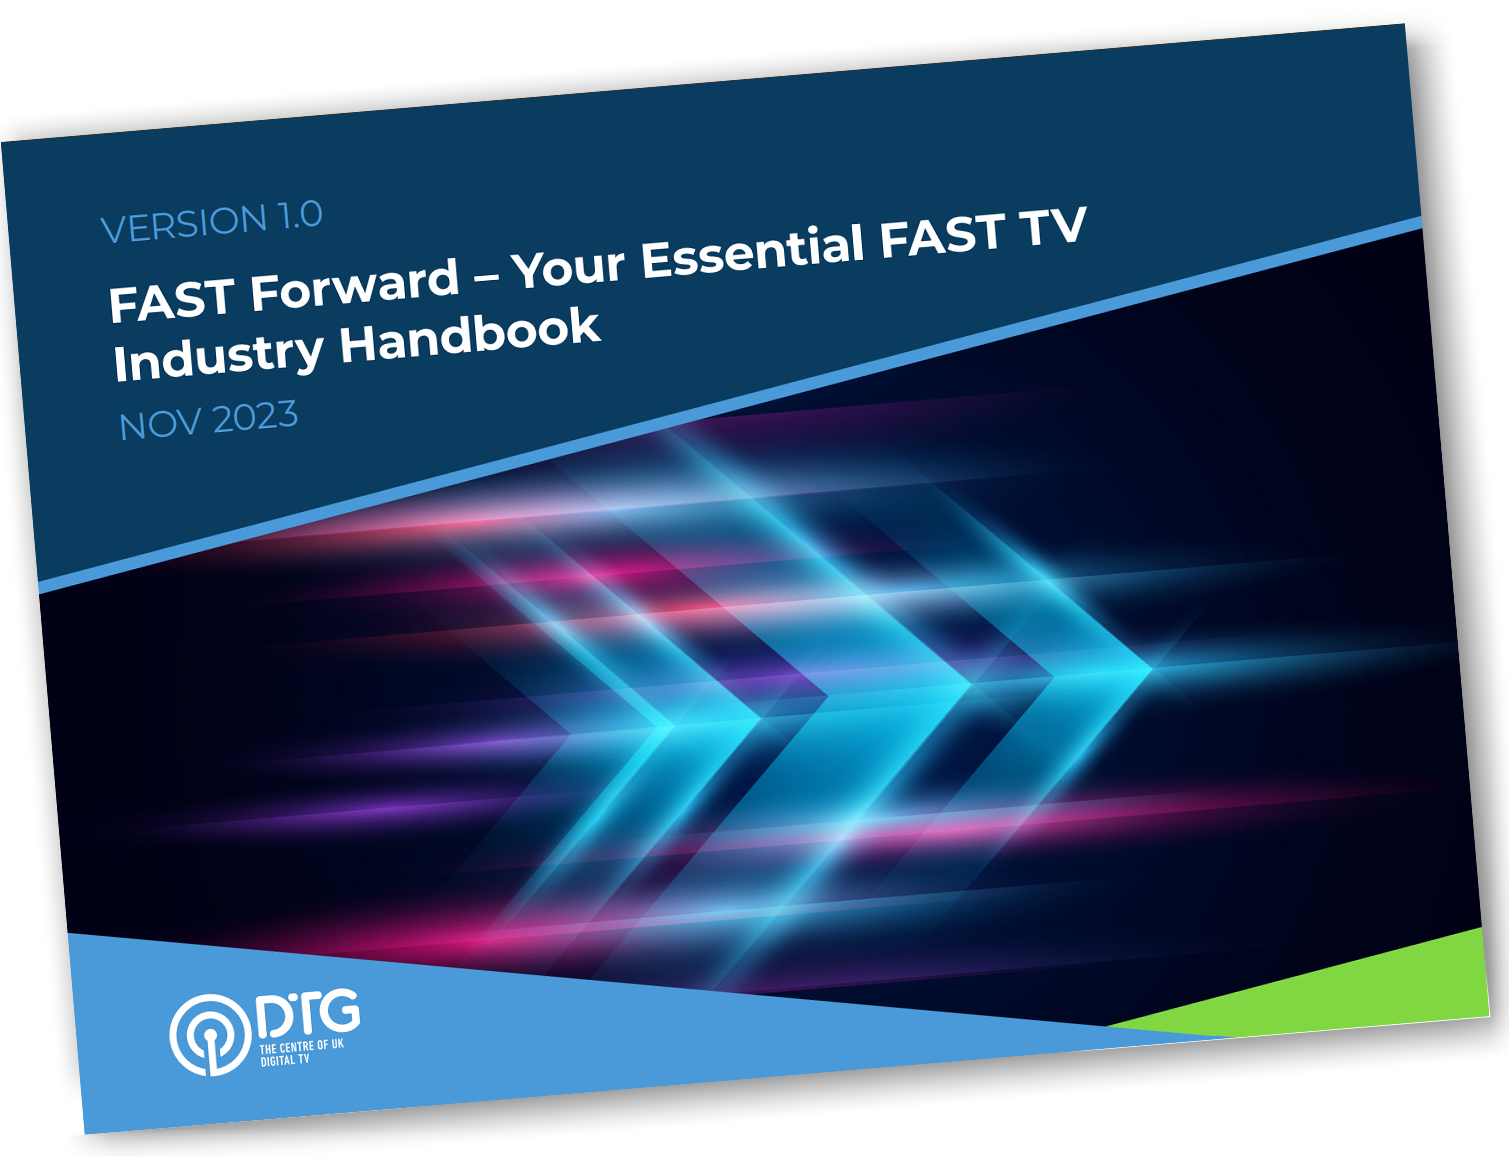 The new DTG report on FAST TV is now available!